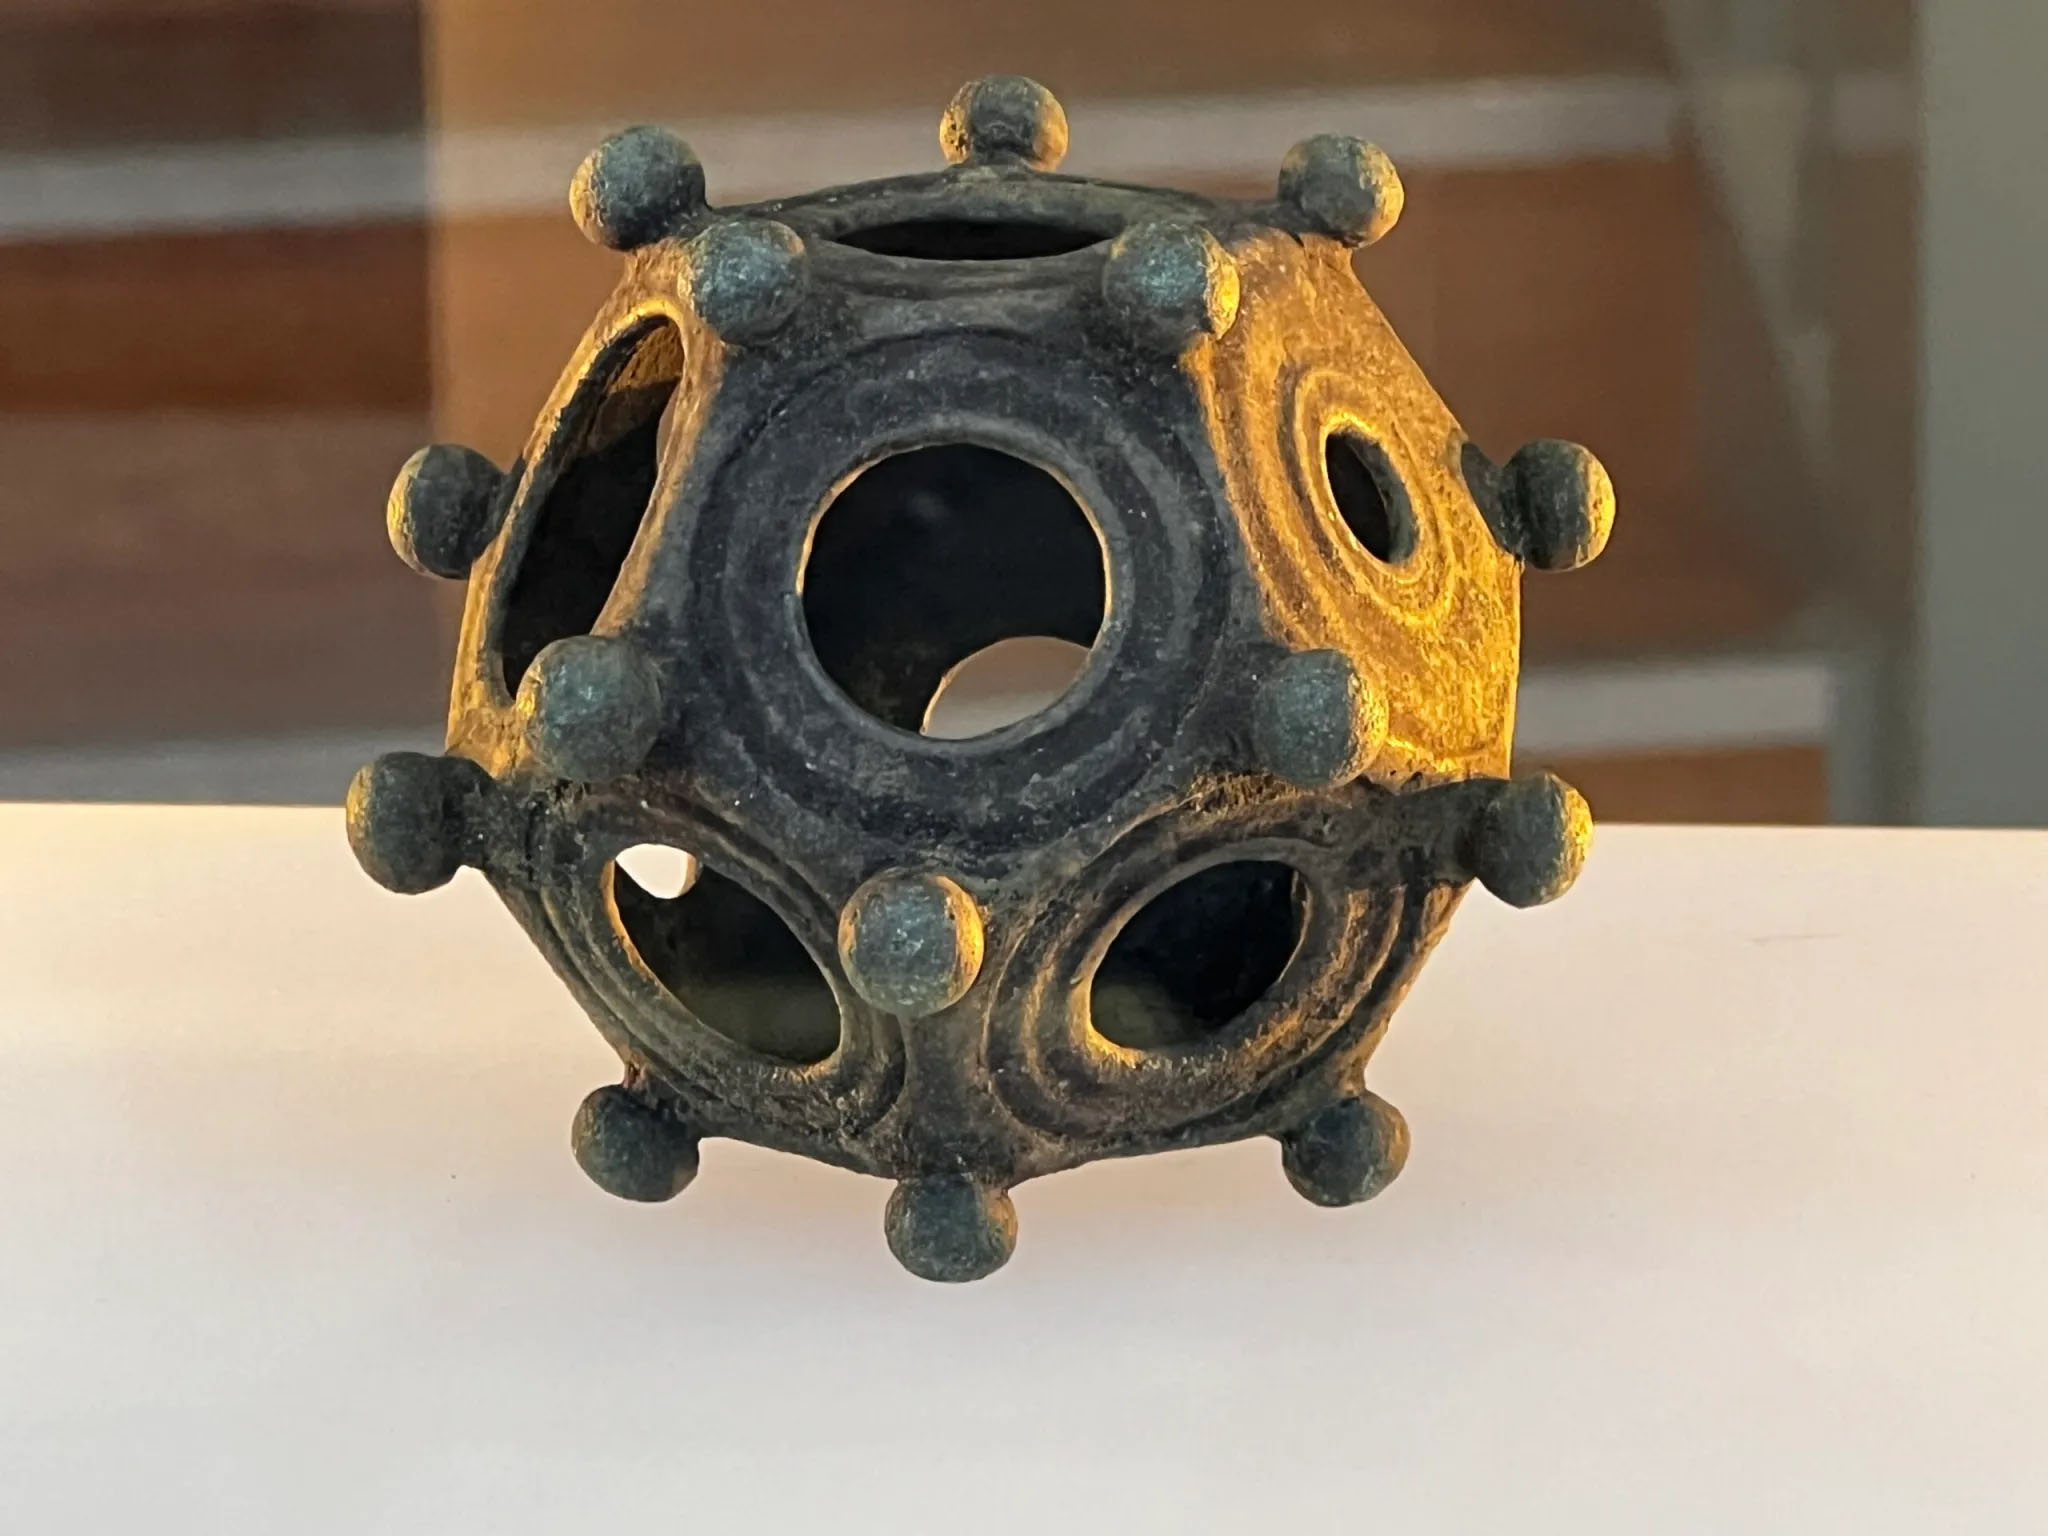 12-sided roman relic baffles archaeologists, spawns countless theories